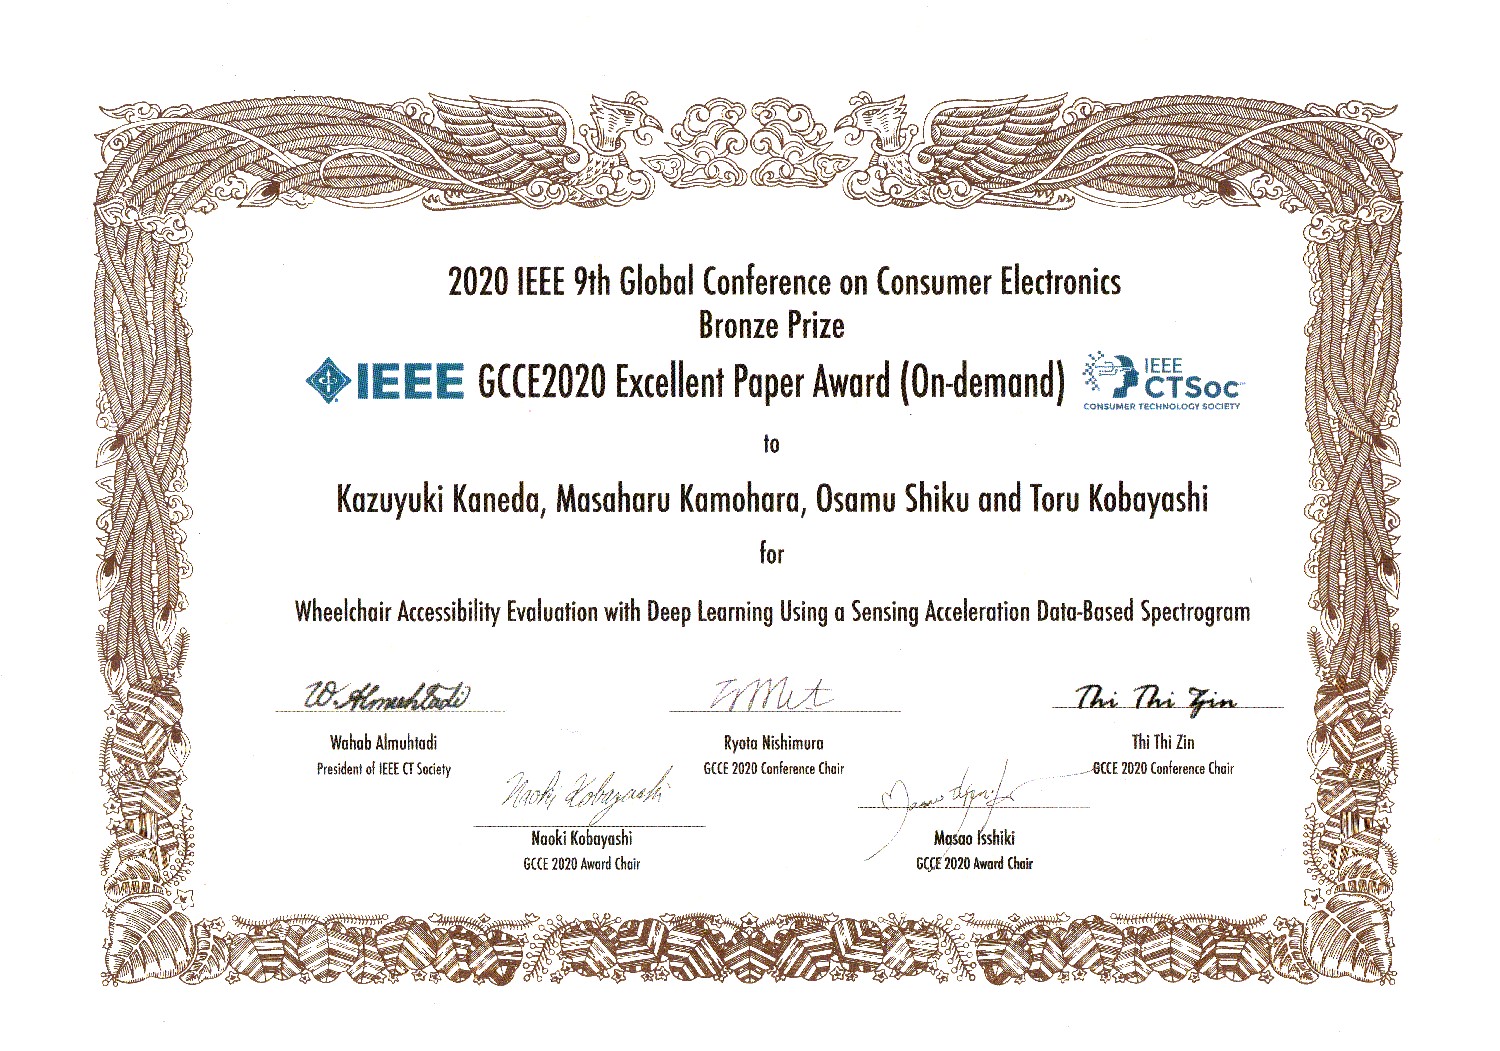 GCCE 2020 Excellent Paper Award 賞状